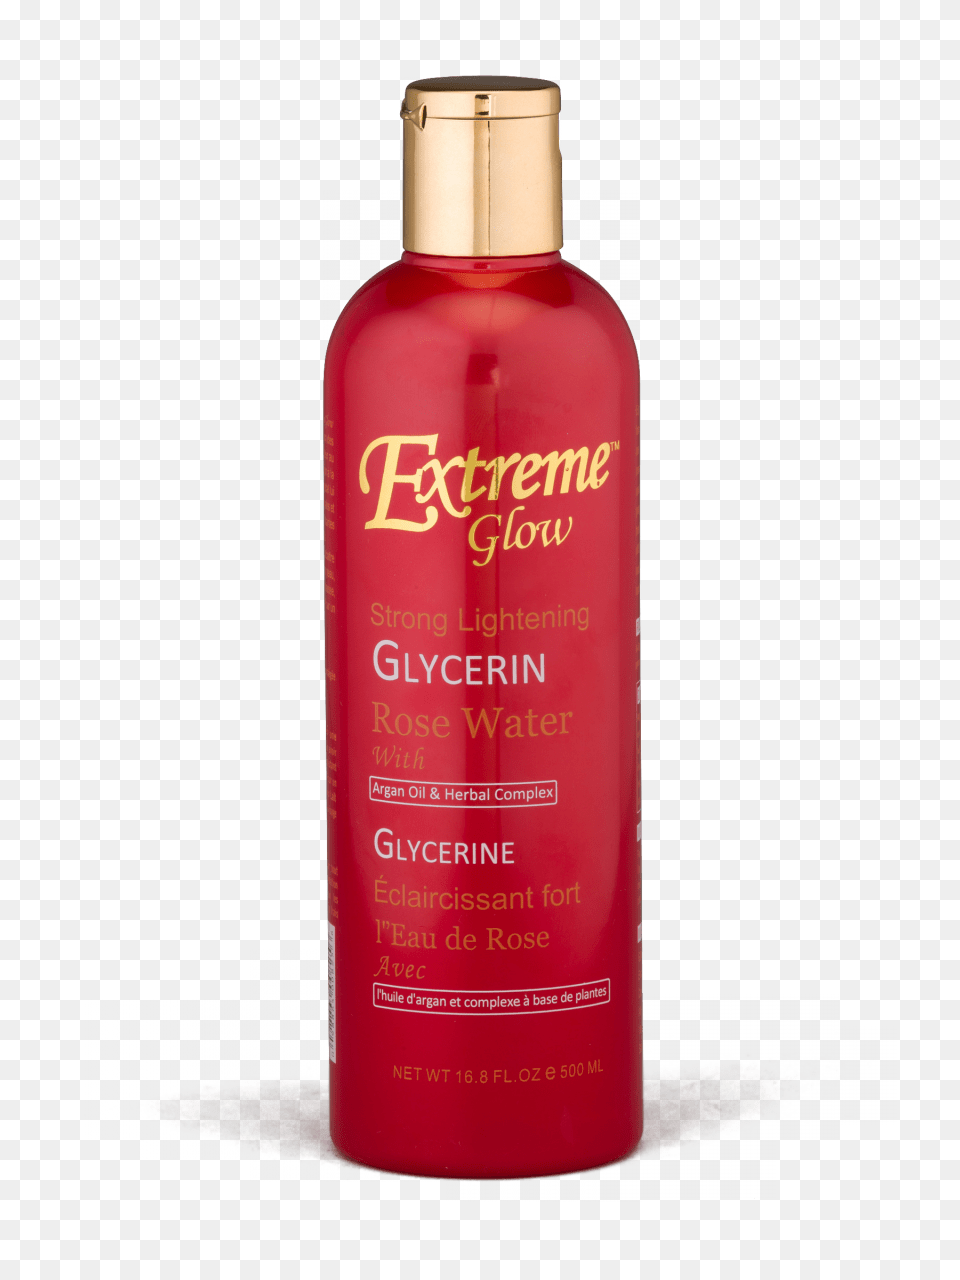 Extreme Glow Strong Lightening Glycerin Rose Water Cosmetics, Bottle, Lotion, Shampoo, Perfume Free Png Download